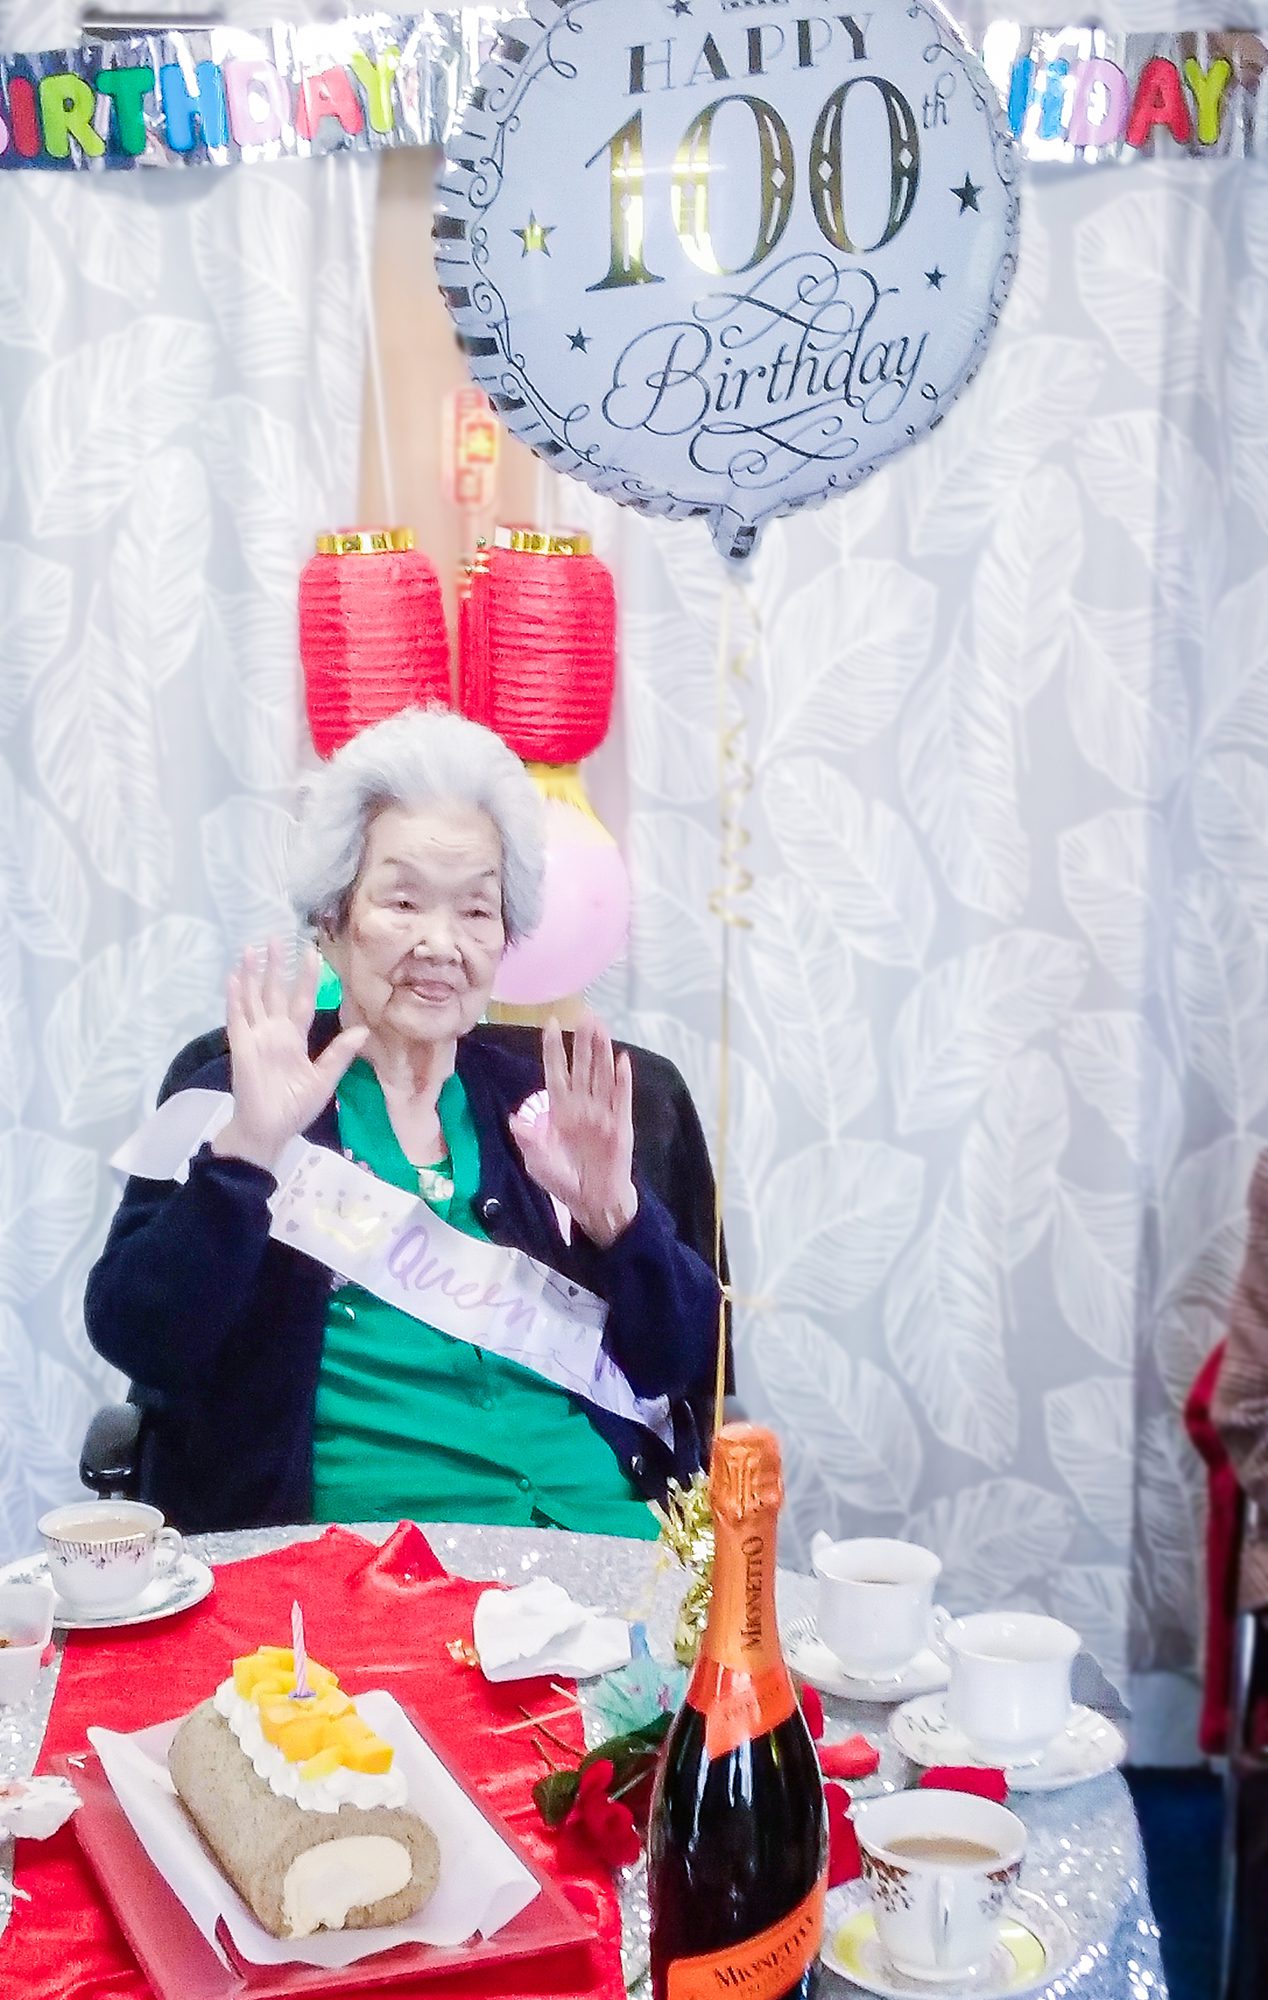 Dance loving Norma on her 100th birthday surrounded by cake and balloons